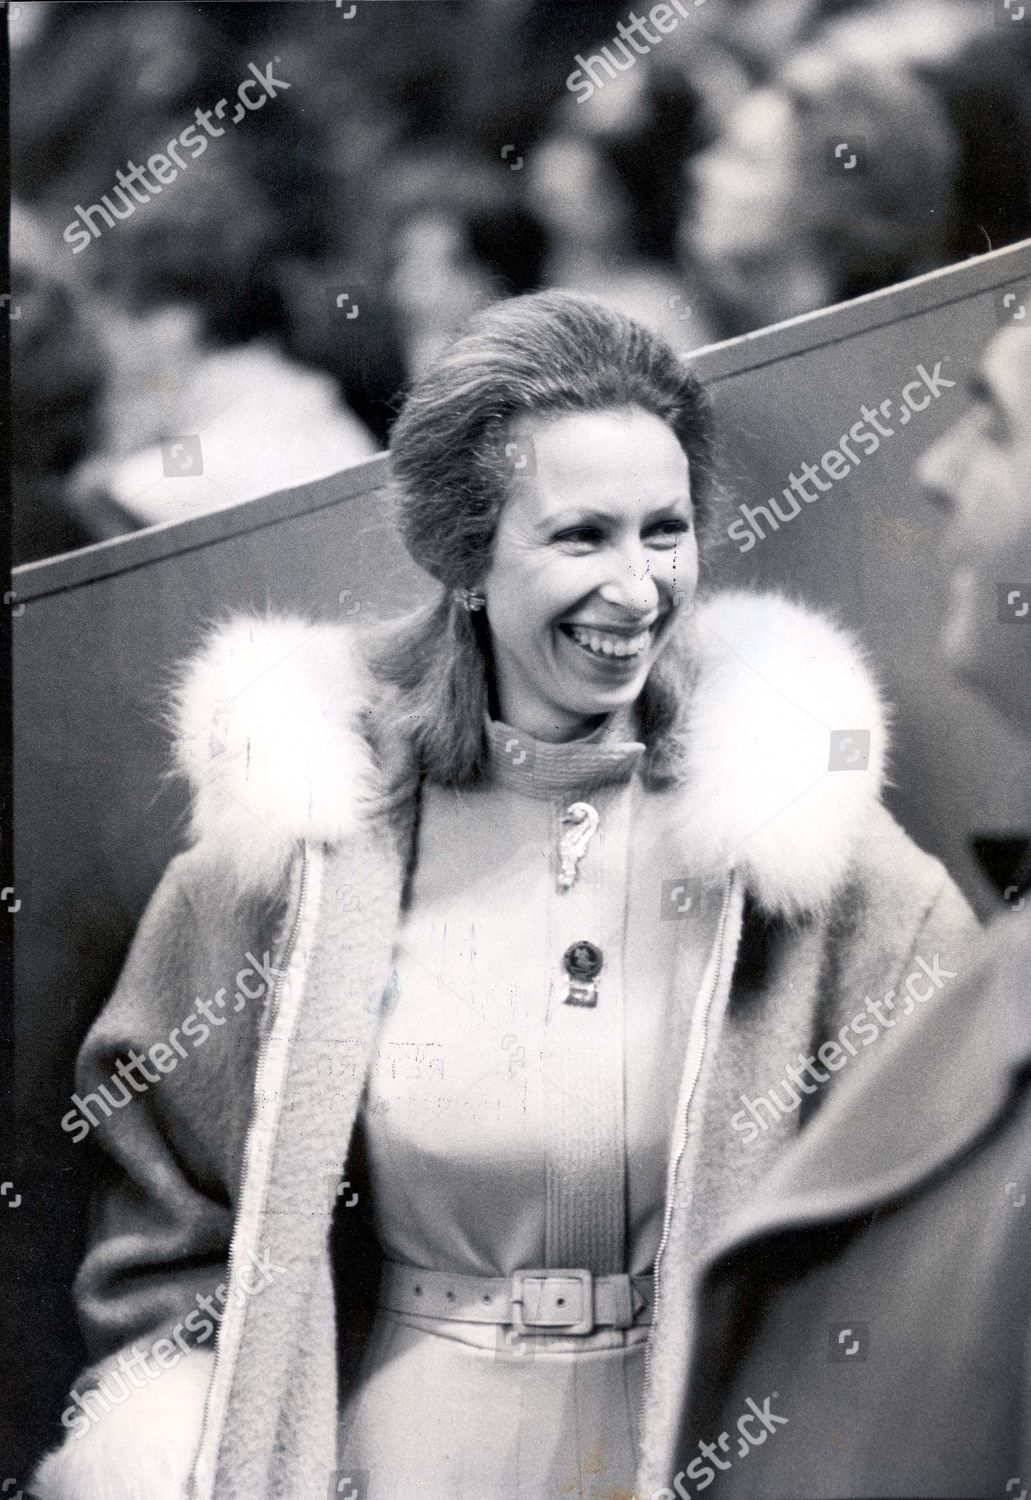 princess-anne-now-princess-royal-1979-picture-shows-princess-anne-at-the-international-show-jumping-championship-at-olympia-angela-rippon-and-mark-phillips-are-taking-part-in-the-event-news-reader-angela-rippon-s-horse-had-three-refusals-and-shutterstock-editorial-890982a.jpg